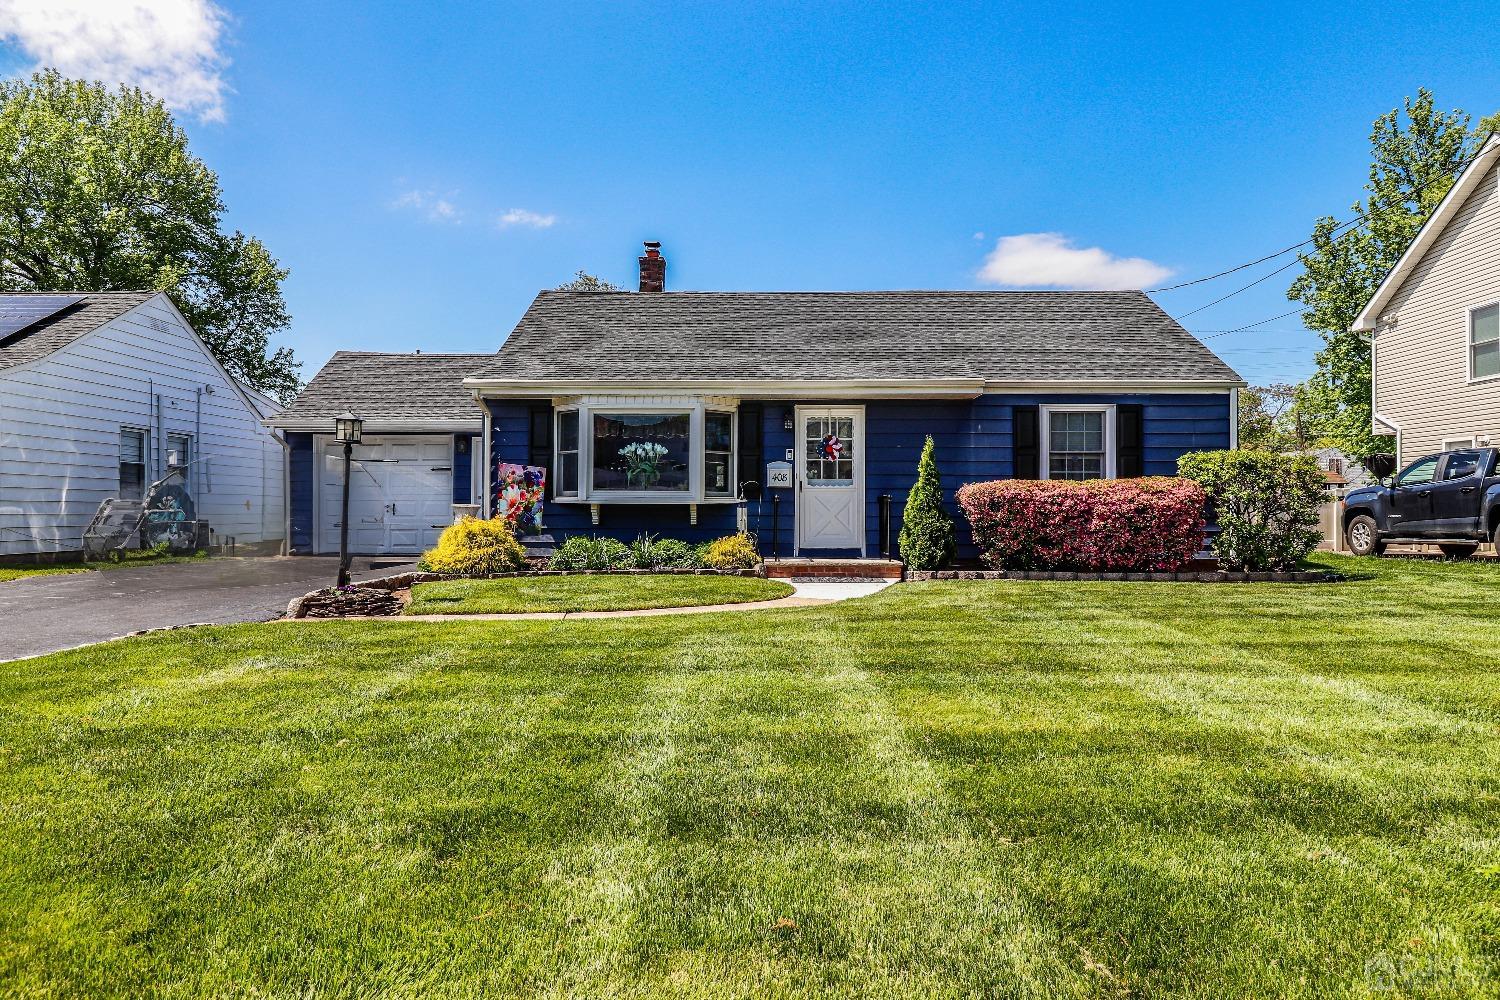 Welcome Home! Pride of ownership inside and out of this stunning expanded 3bdrm,2 bath ranch near Merrill Park minutes from NY train, shops, schools, restaurants, airport, public transportation, Country Club and swim club. A must see!